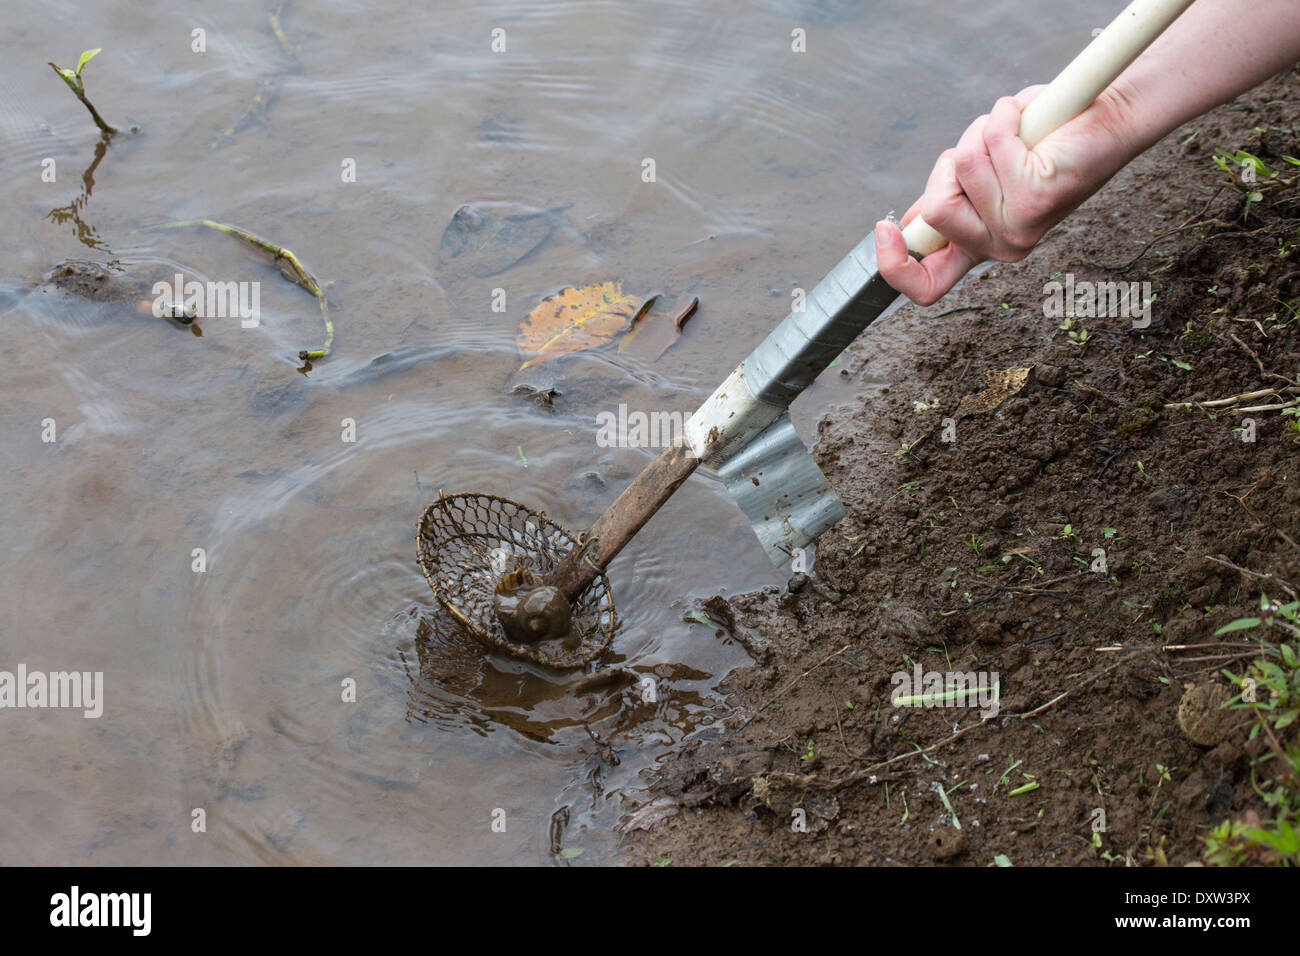 Person's hand using snail removal tool to remove a Golden Apple Snail (Pomacea canaliculata) from taro pond in Kauai Stock Photo